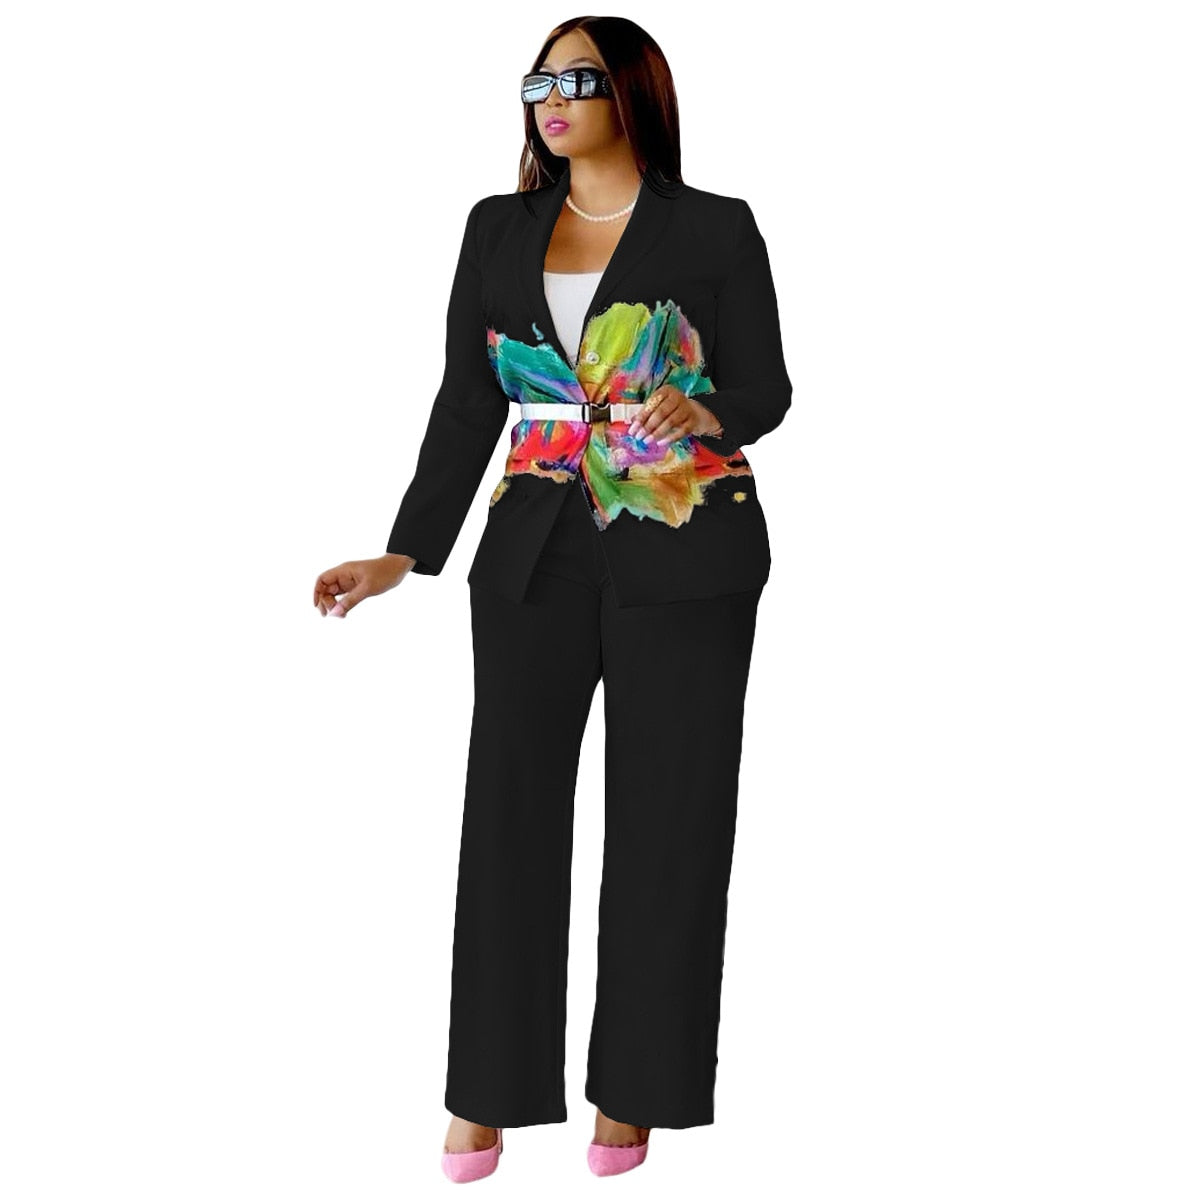 Aovica African Women Sets Long Sleeve Blazer Jacket And Pants Suits Office Lady Elegant 2 Piece Set Business Outfits Africa Clothing